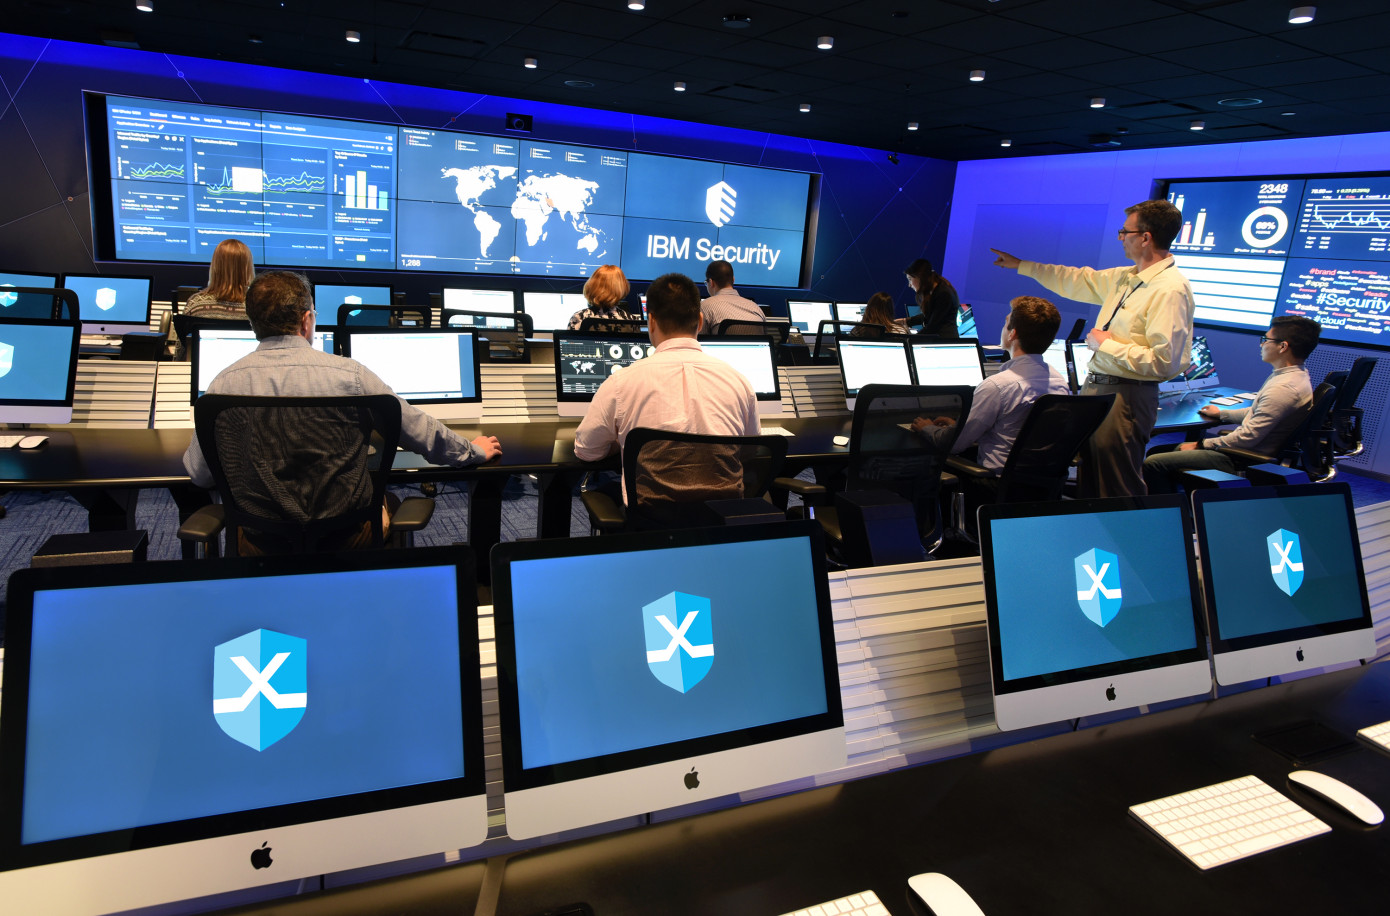 IBM Cyber Security X-Force Command Center Cambridge, MA (John Mottern/Feature Photo Service for IBM)